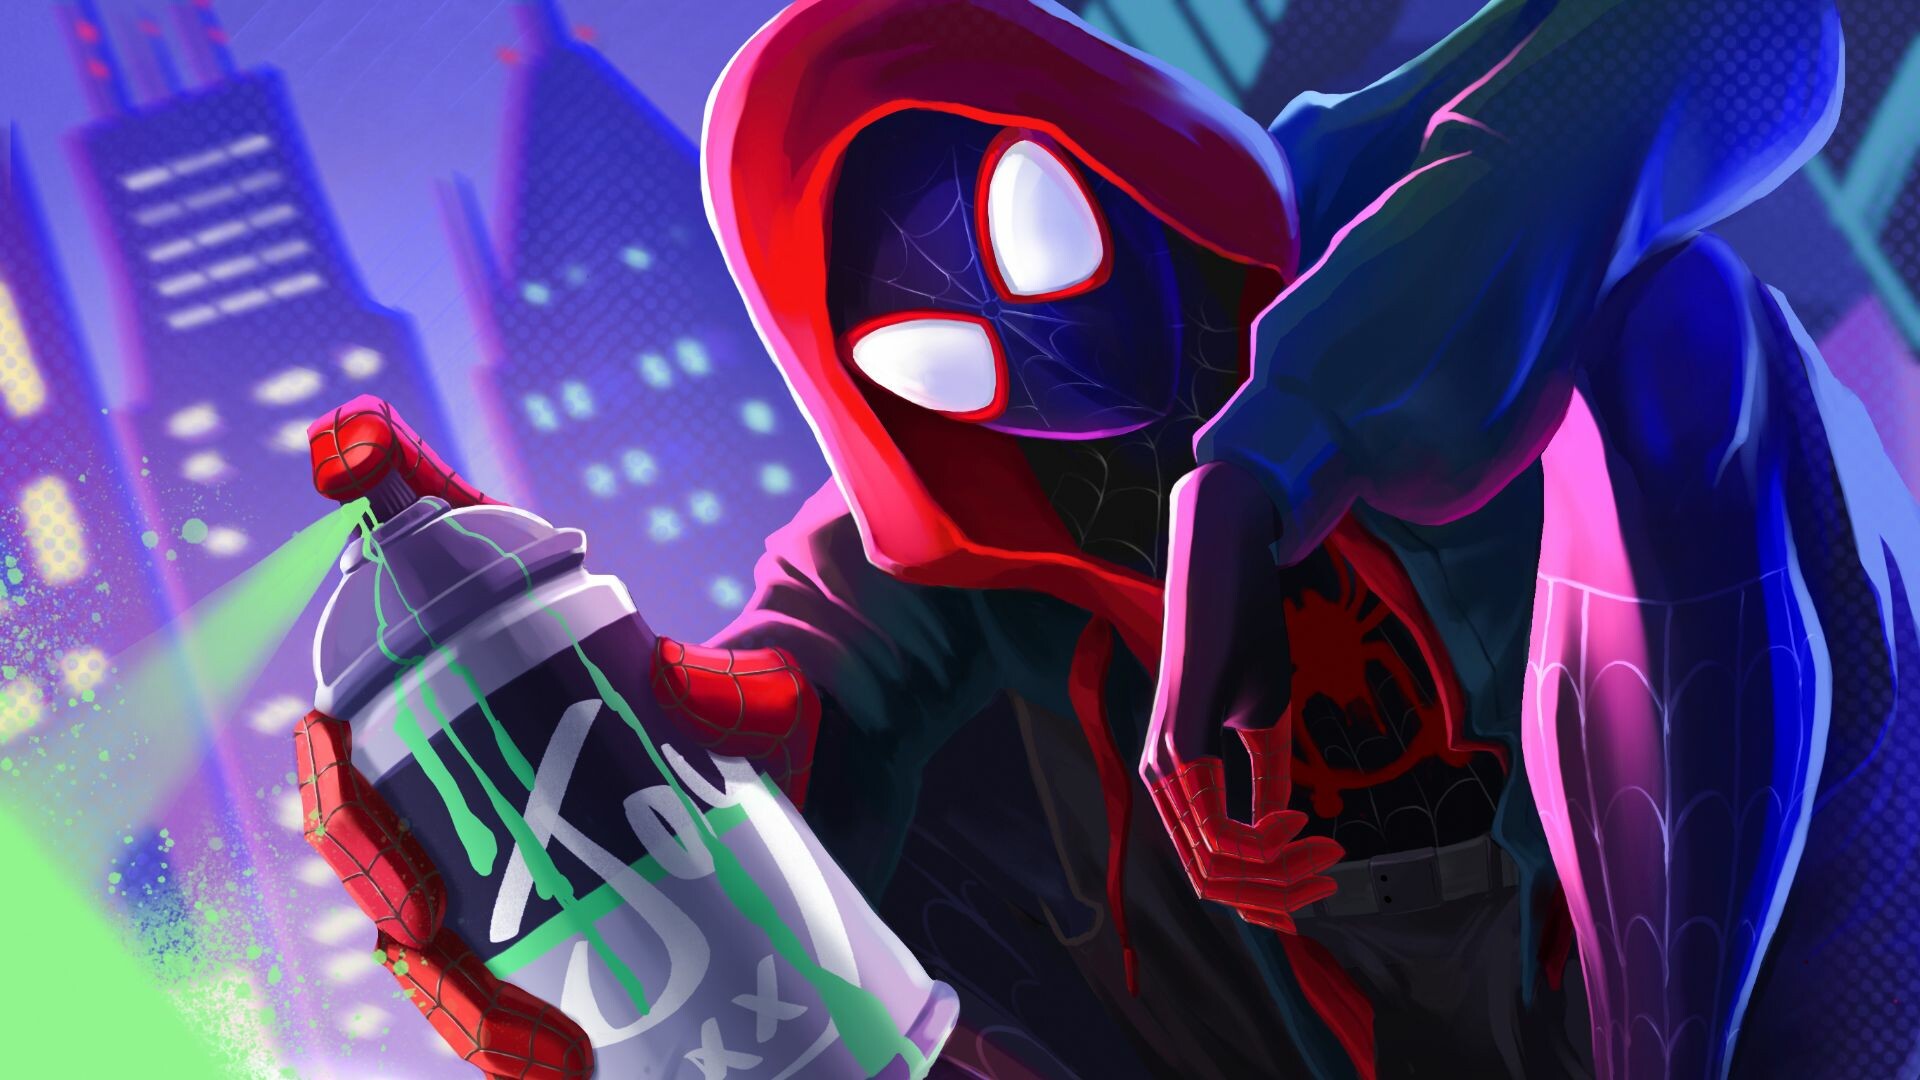 Spider-Man: Into the Spider-Verse: The movie centers on the adventures of the Brooklyn teen Miles Morales. 1920x1080 Full HD Background.